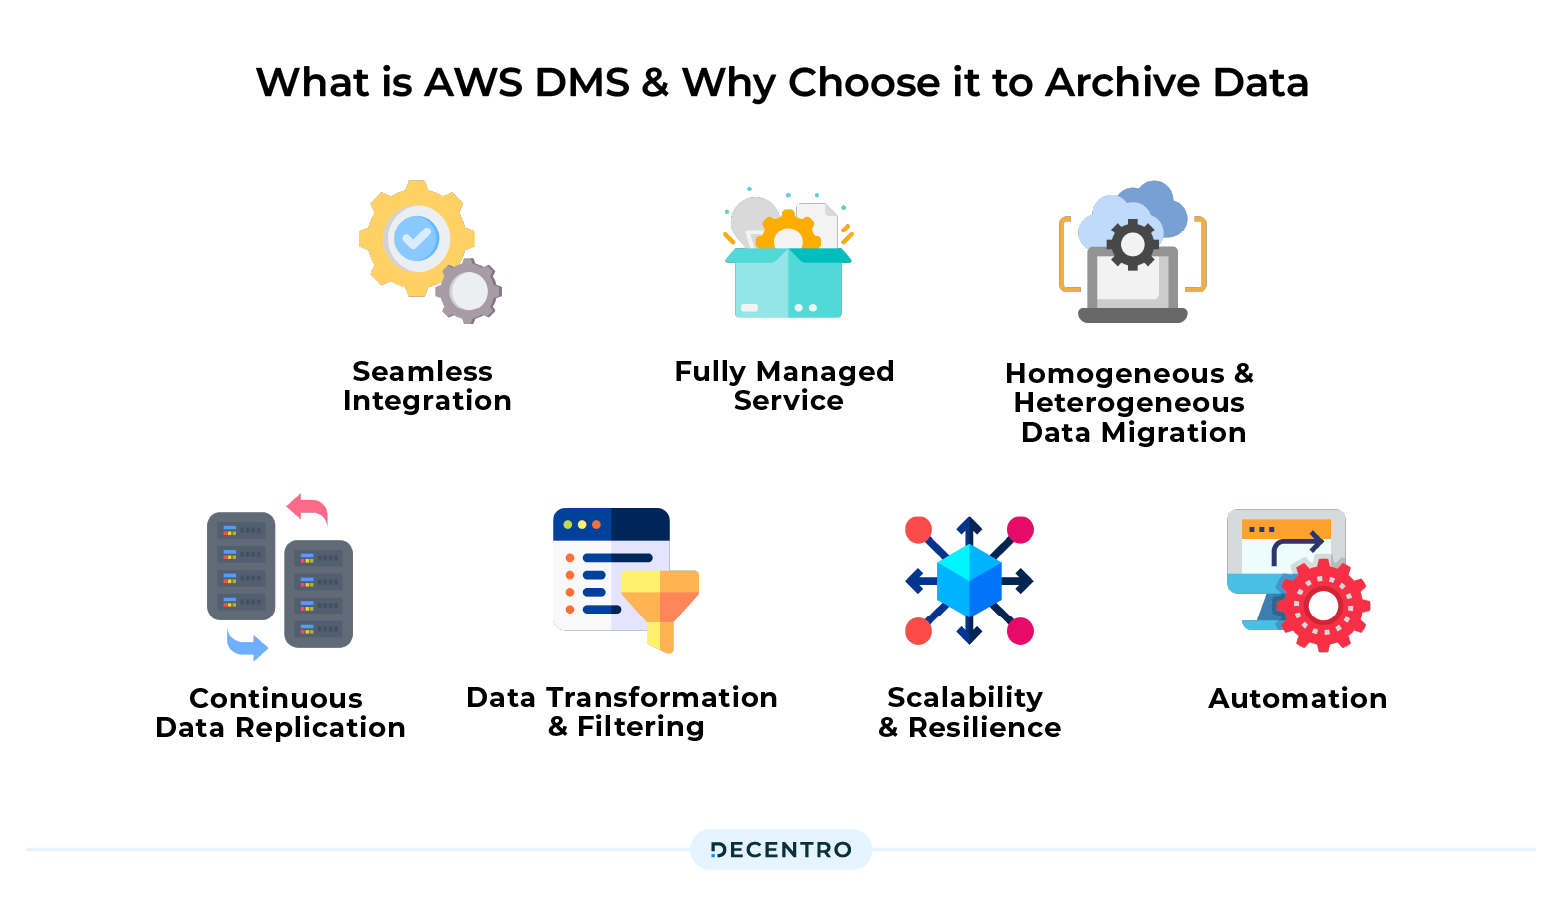 What is AWS DMS & why choose it to archive data